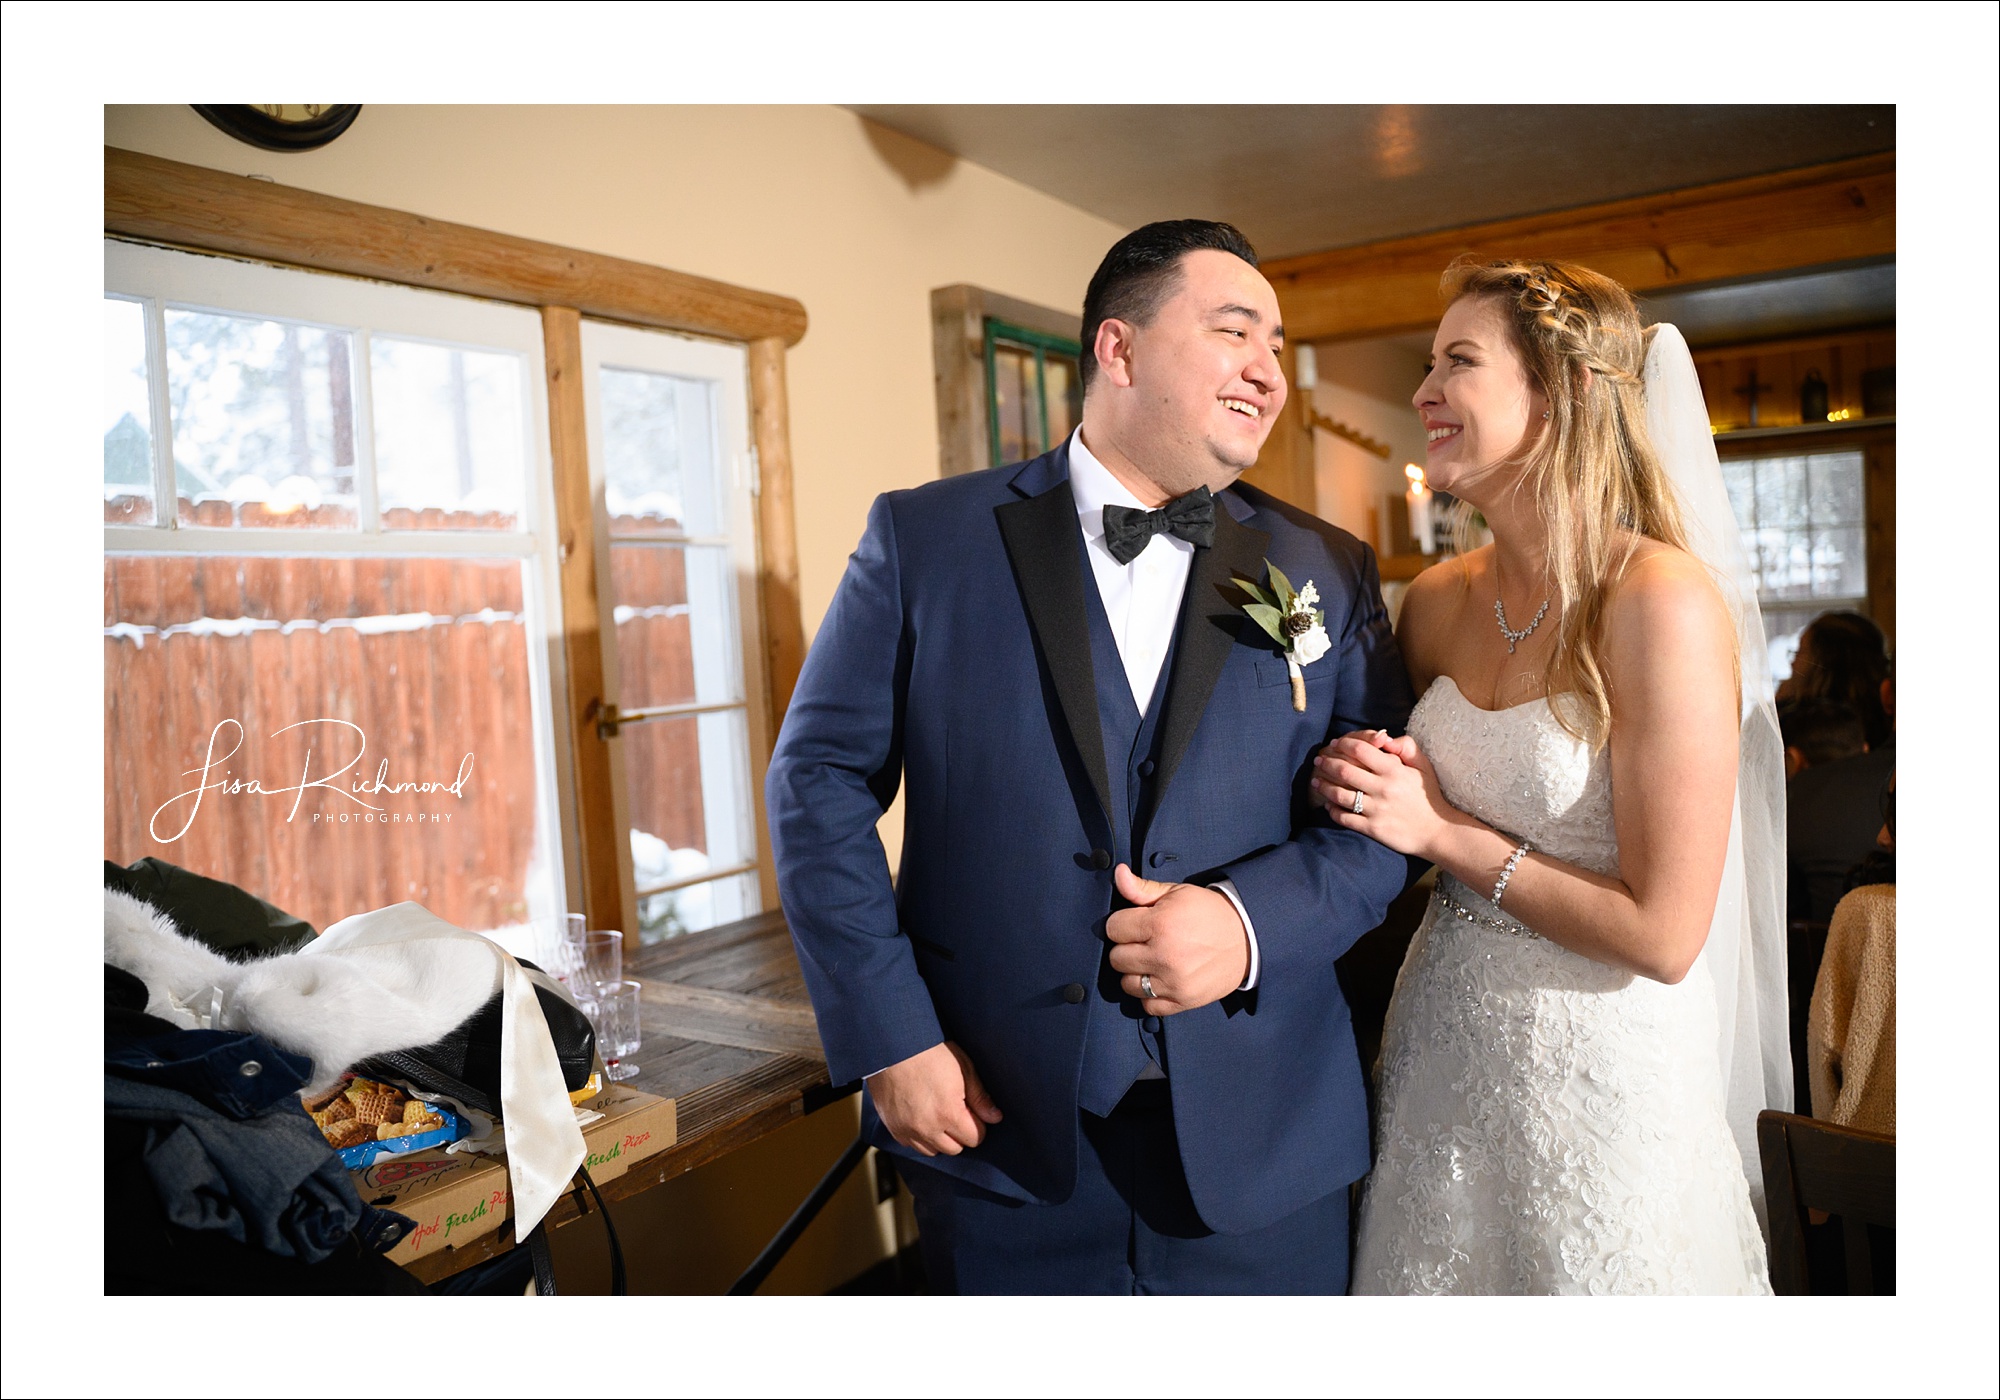 Hannah and Anthony, Tuesday, 2/22/22, South Lake Tahoe